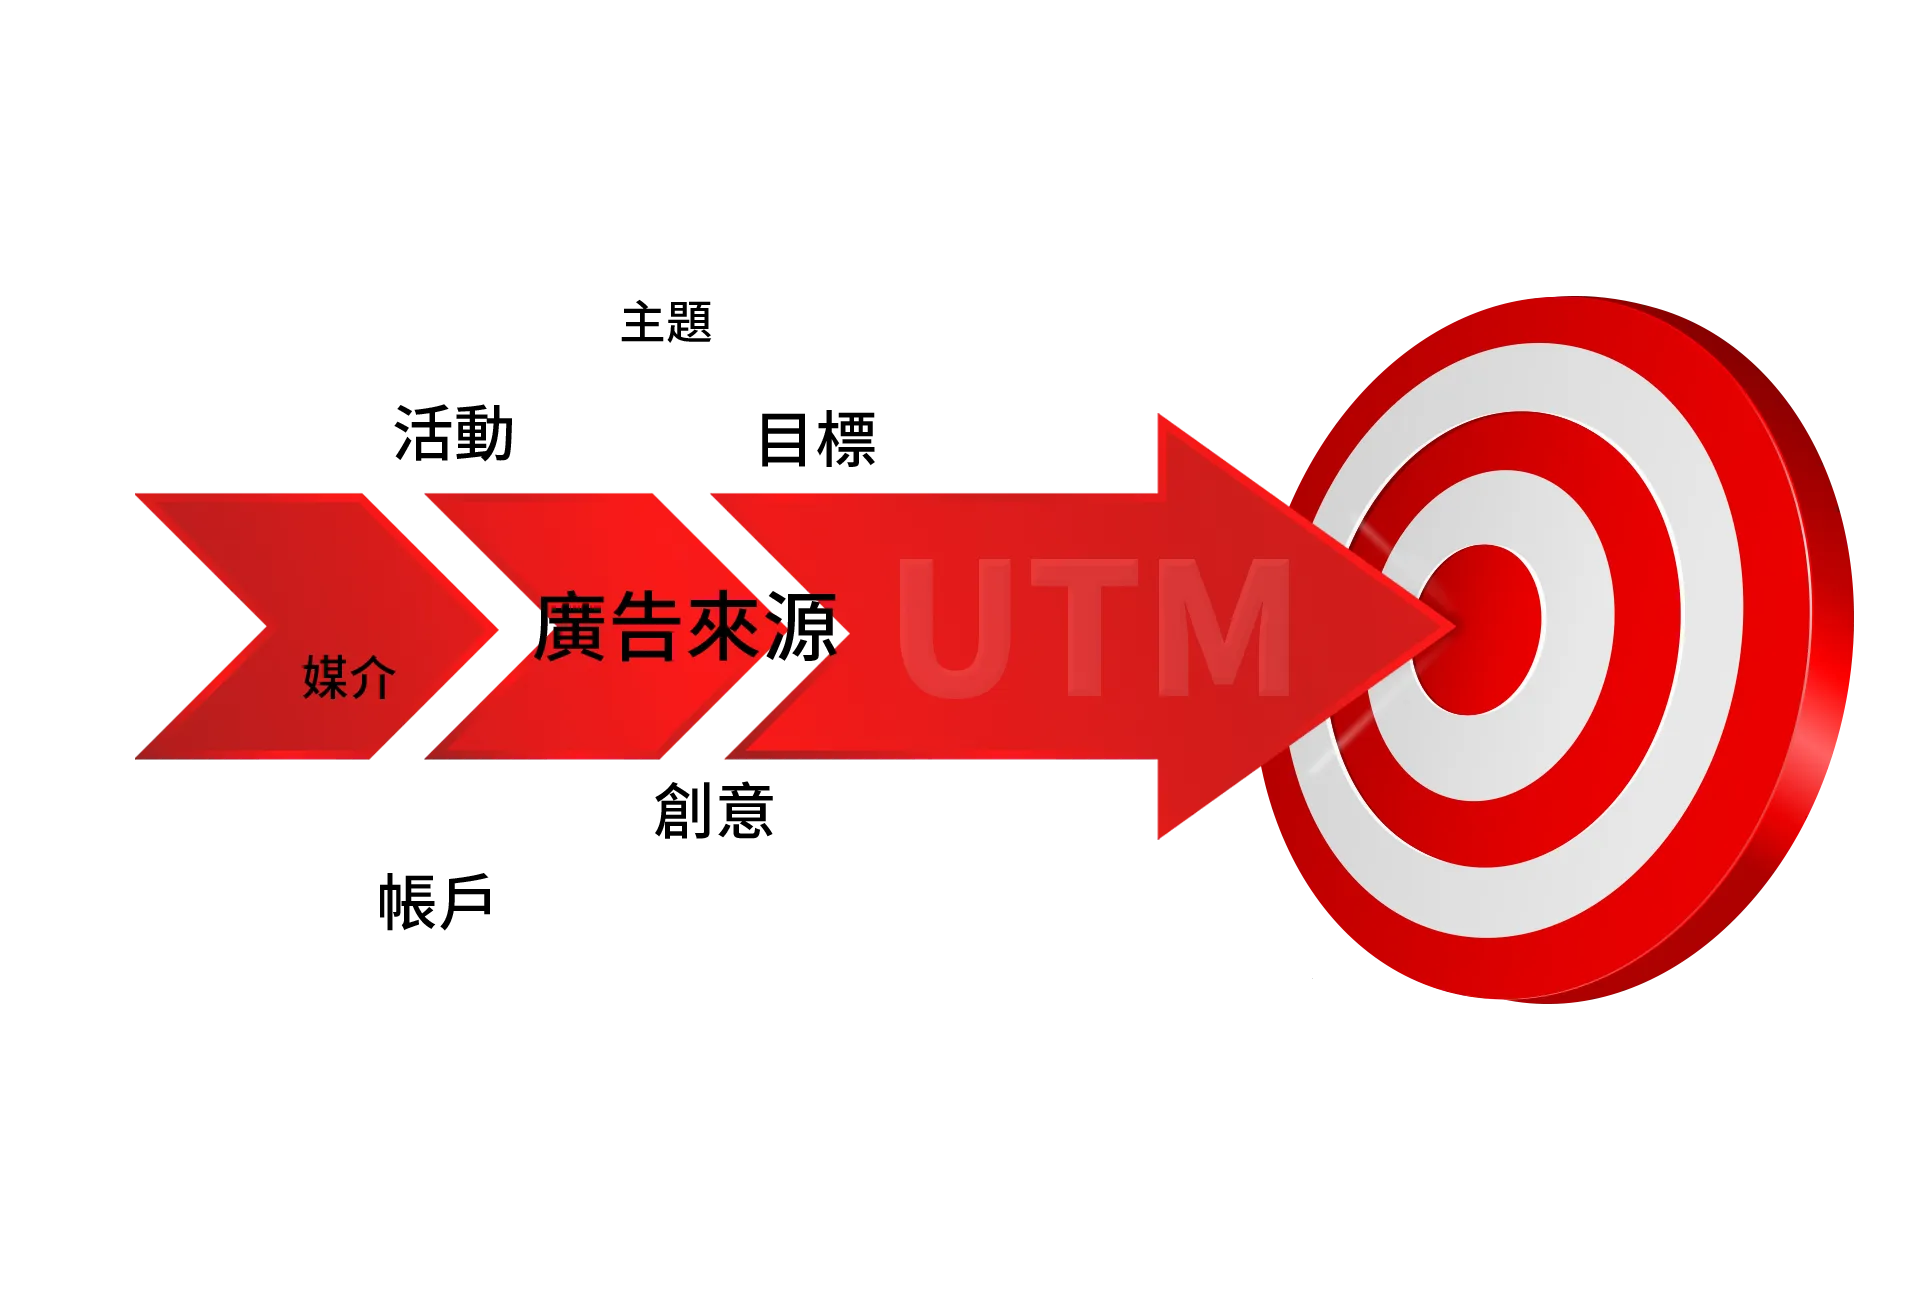 TM is a more flexible customer tracking tool than UTM